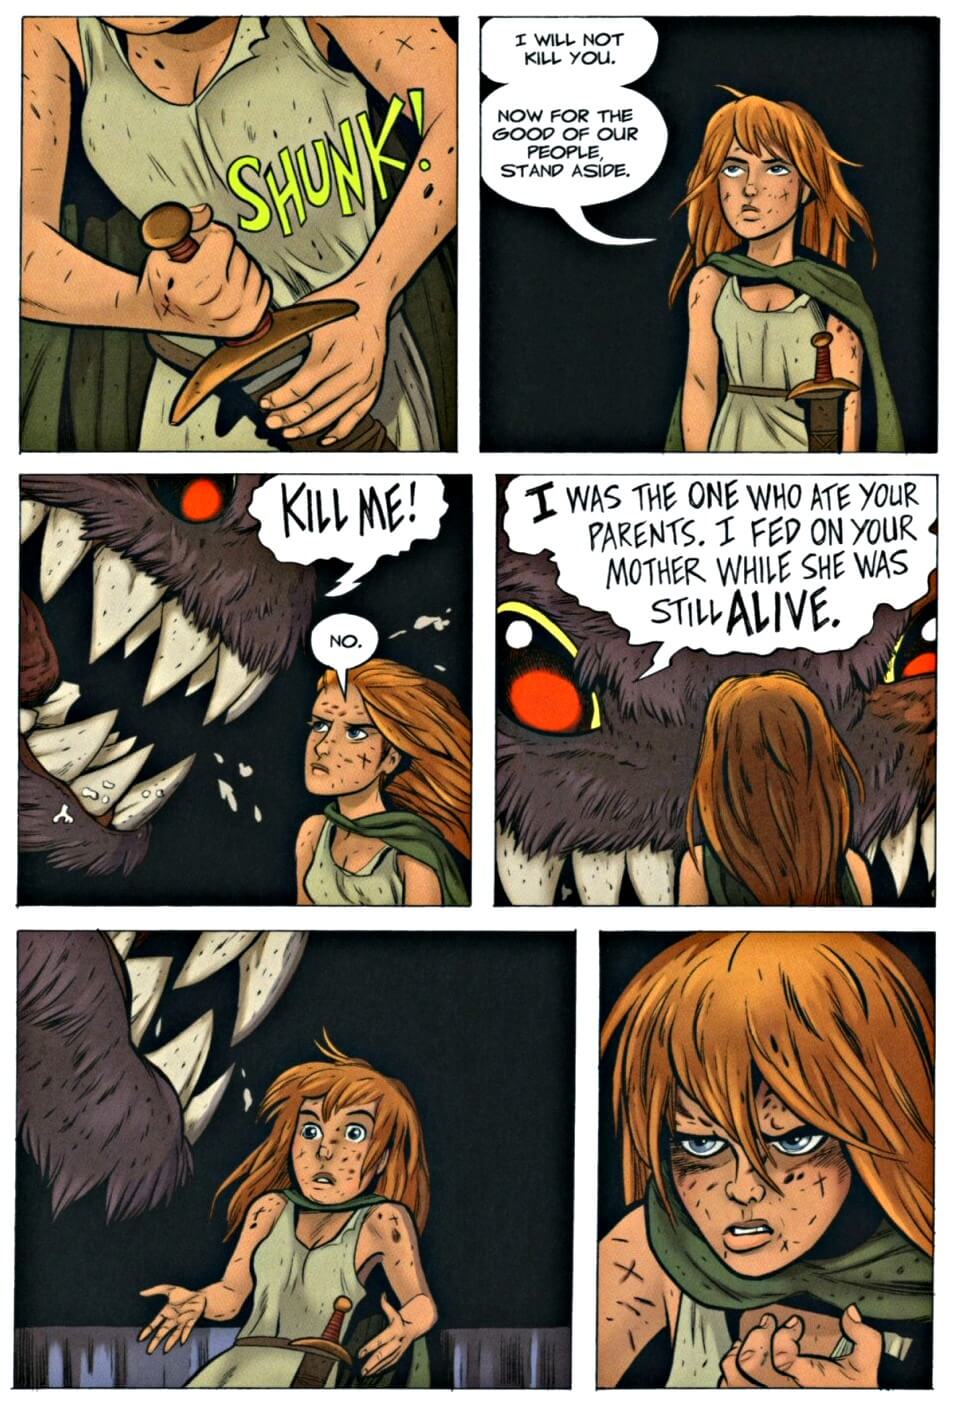 page 138 chapter 5 of bone 9 crown of horns graphic novel